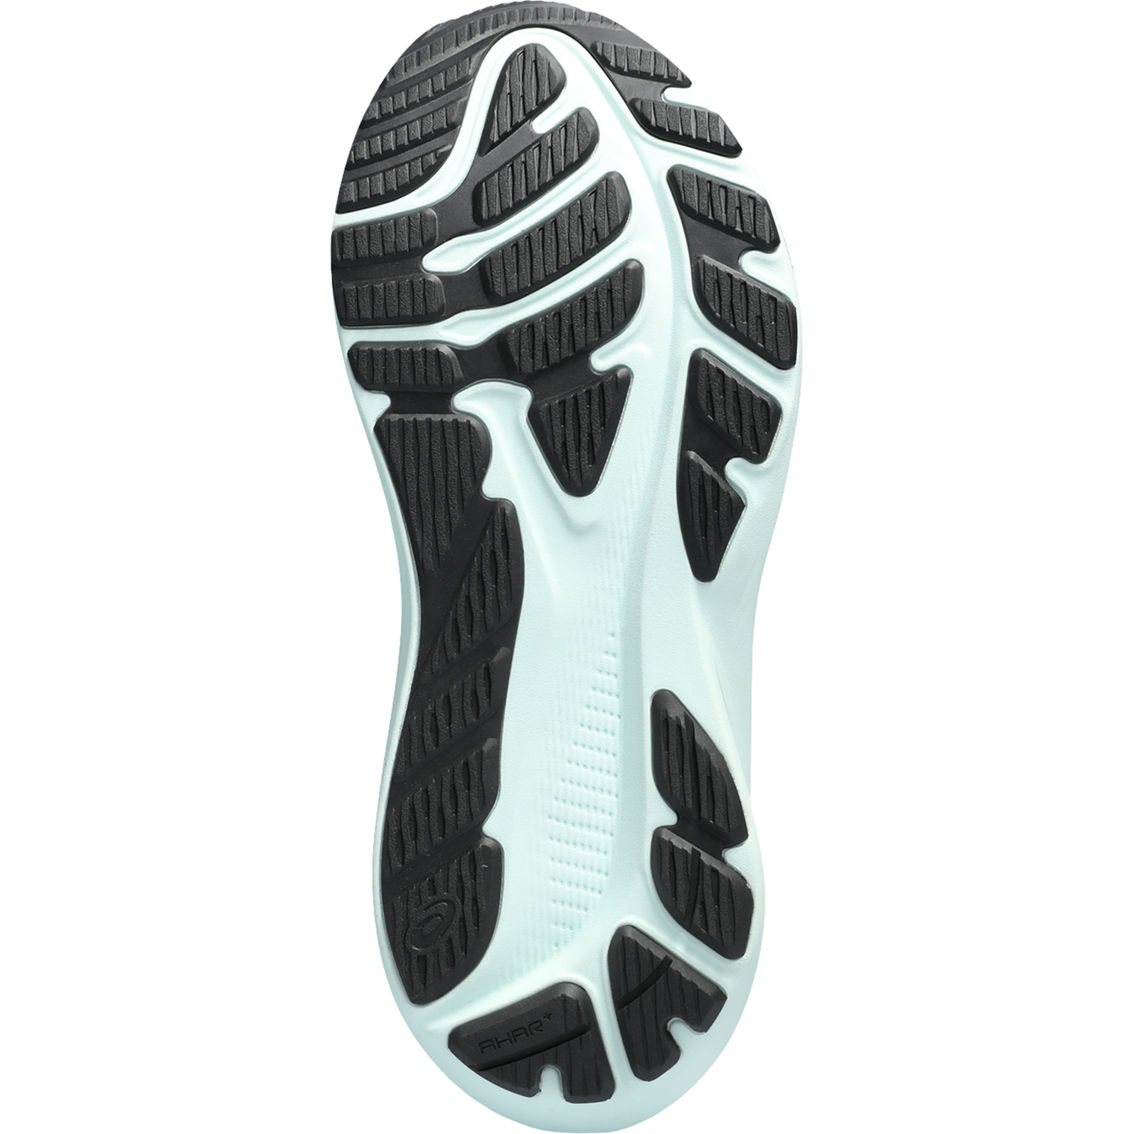 ASICS Women's GT 2000 12 Running Shoes - Image 6 of 7